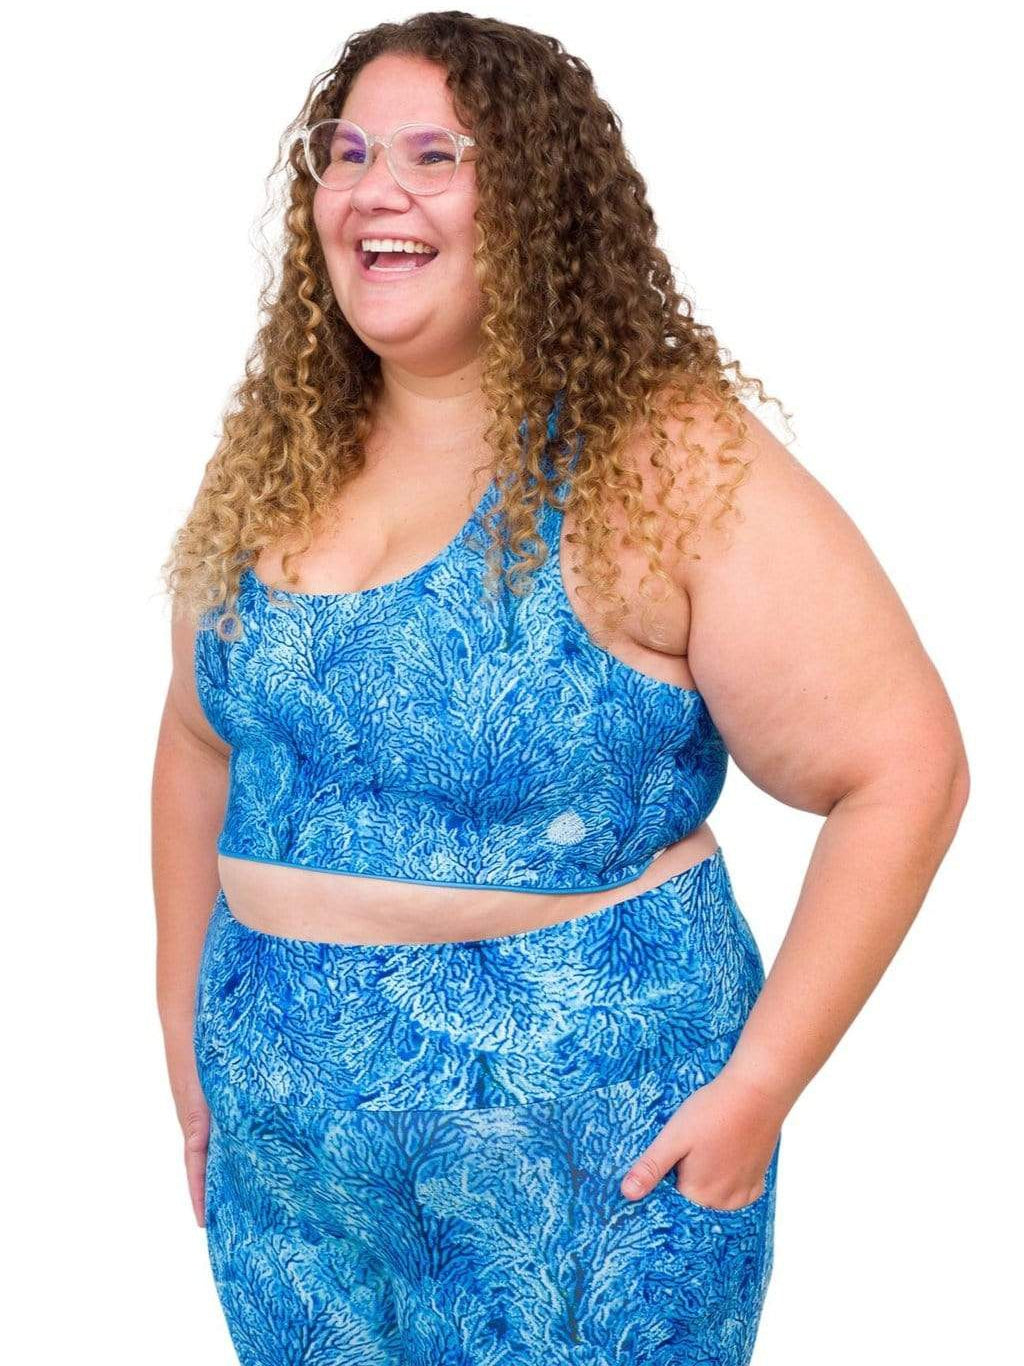 Model: Angela is working towards her Master of Professional Science in Marine Conservation. She is 5&#39;6&quot;, 235 lbs, 42E and is wearing a 2XL top and legging.